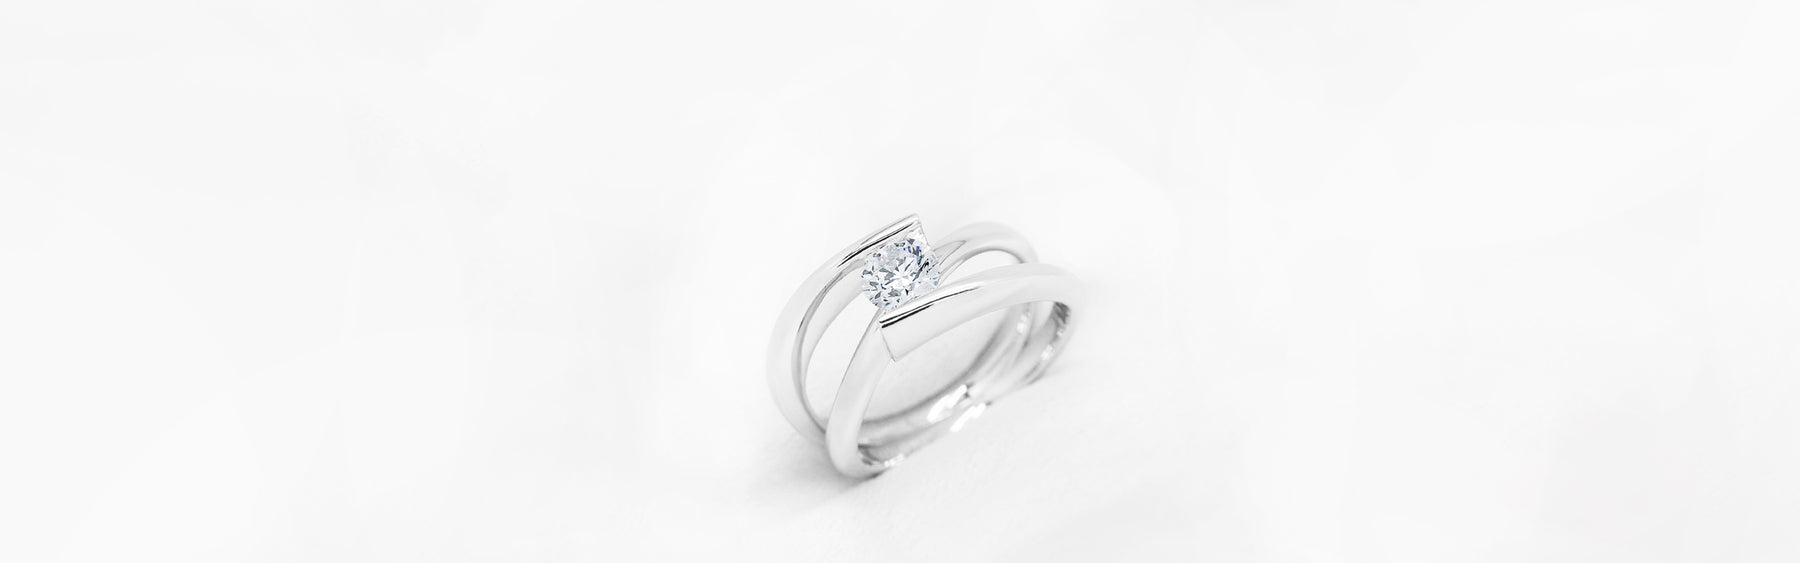 Contemporary Engagement Rings